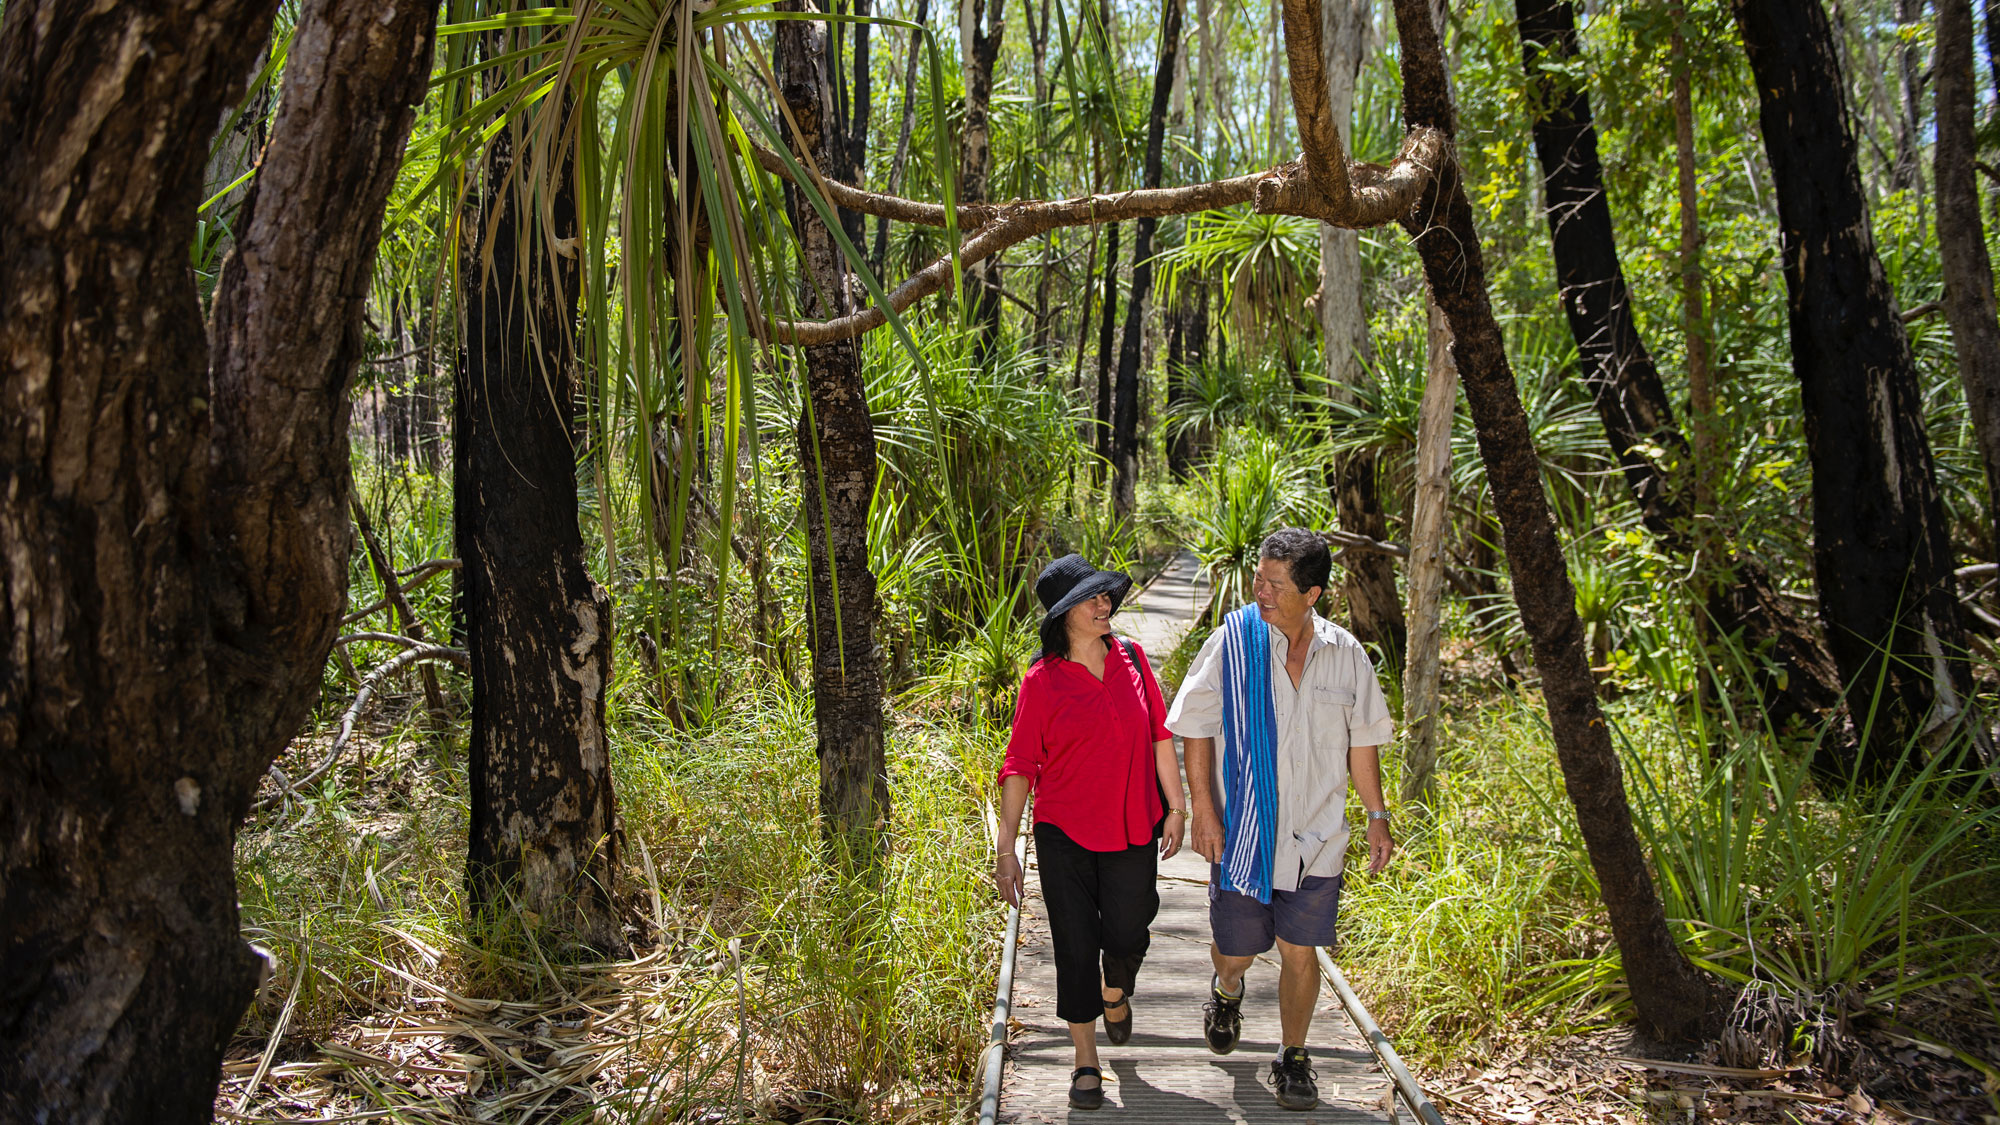 Top End Natural Highlights Eco Adventure - NT Now